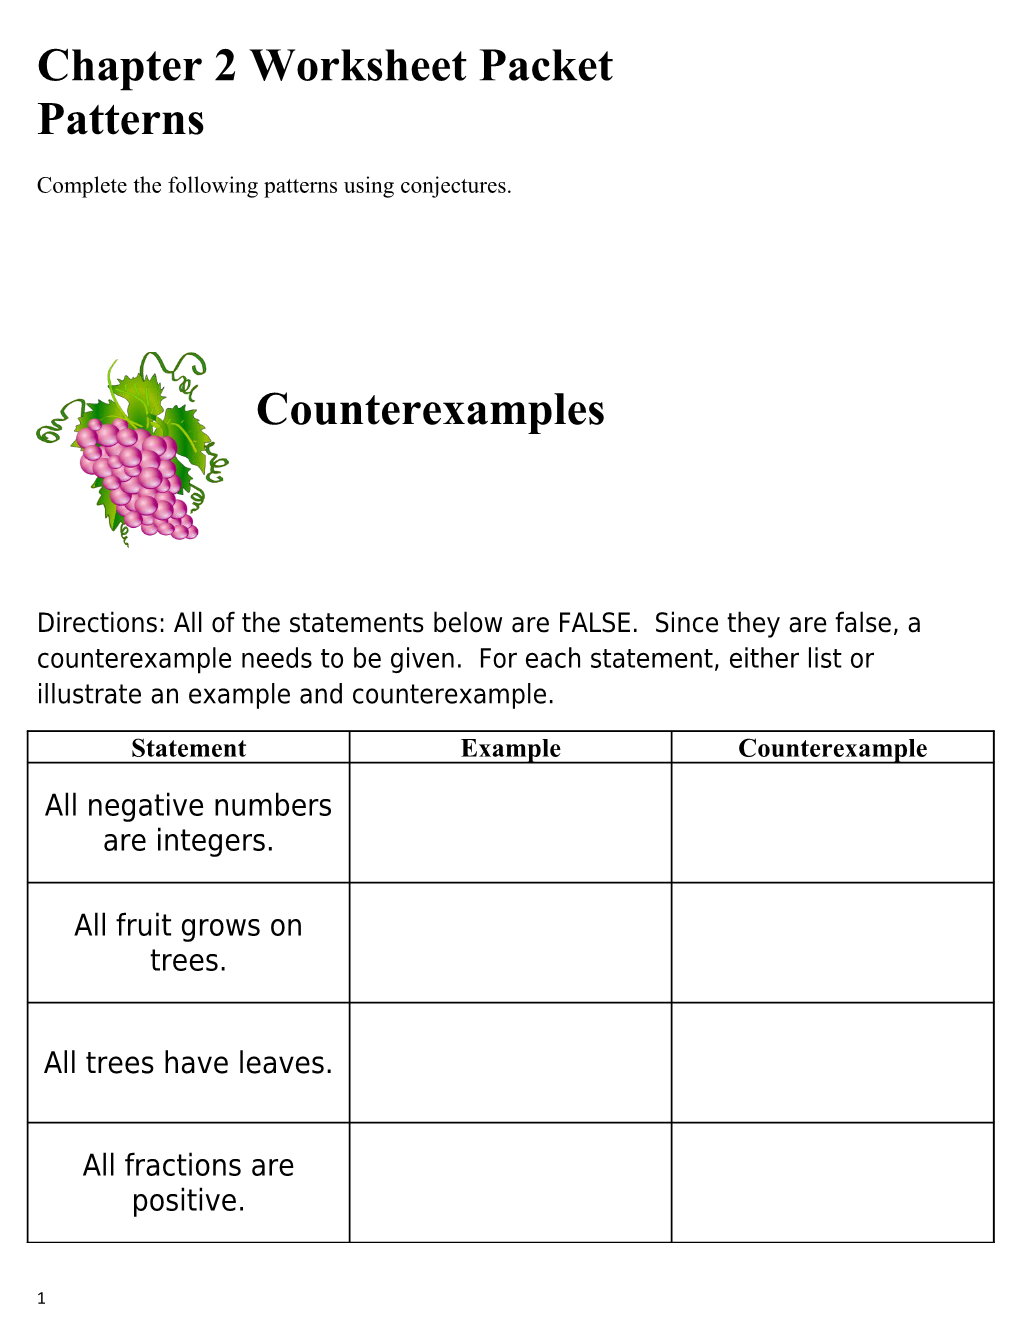 Complete the Following Patterns Using Conjectures